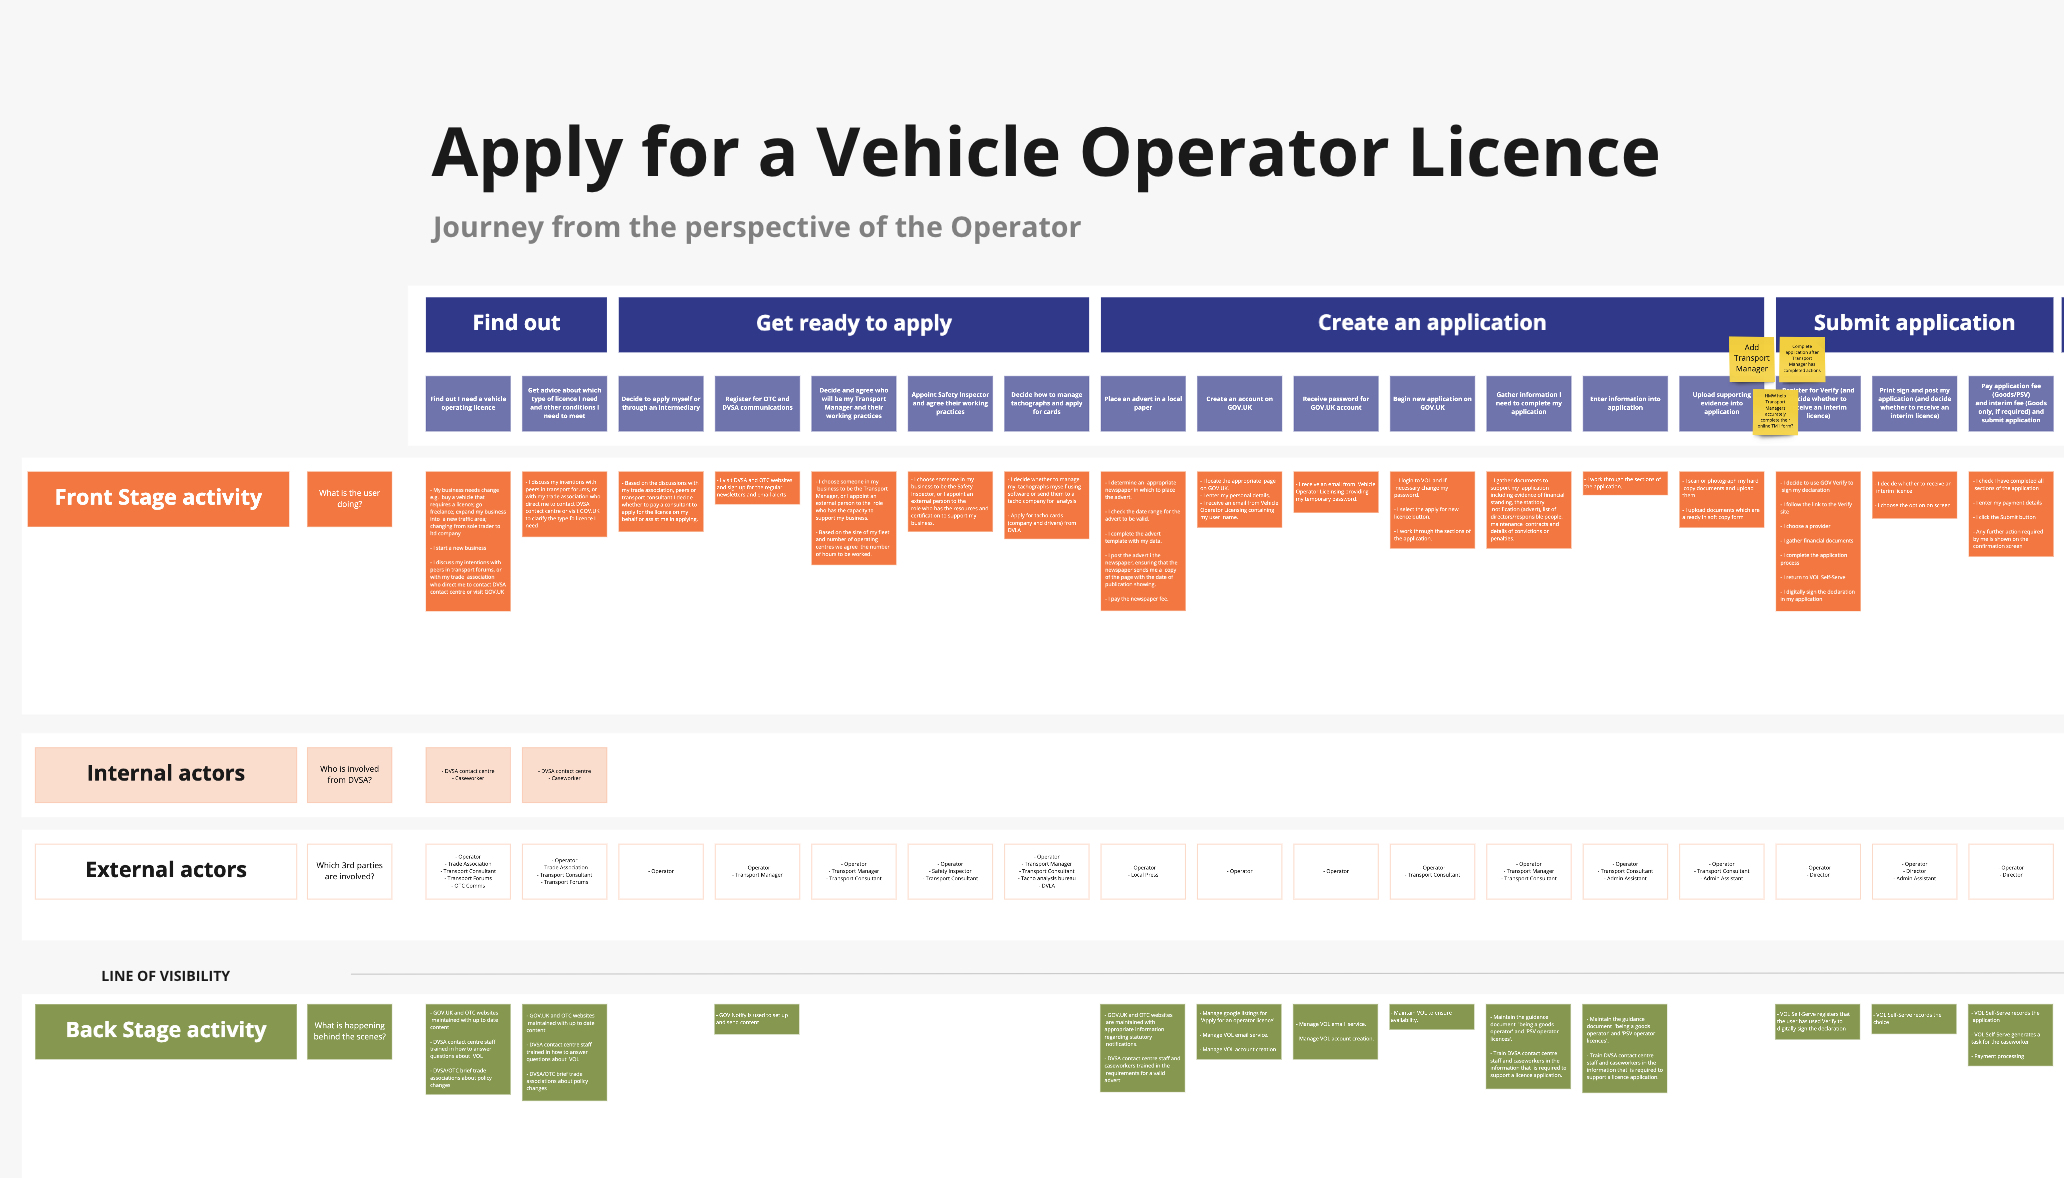 Service blueprint of the initial stages on the apply for a vehicle operator licence service